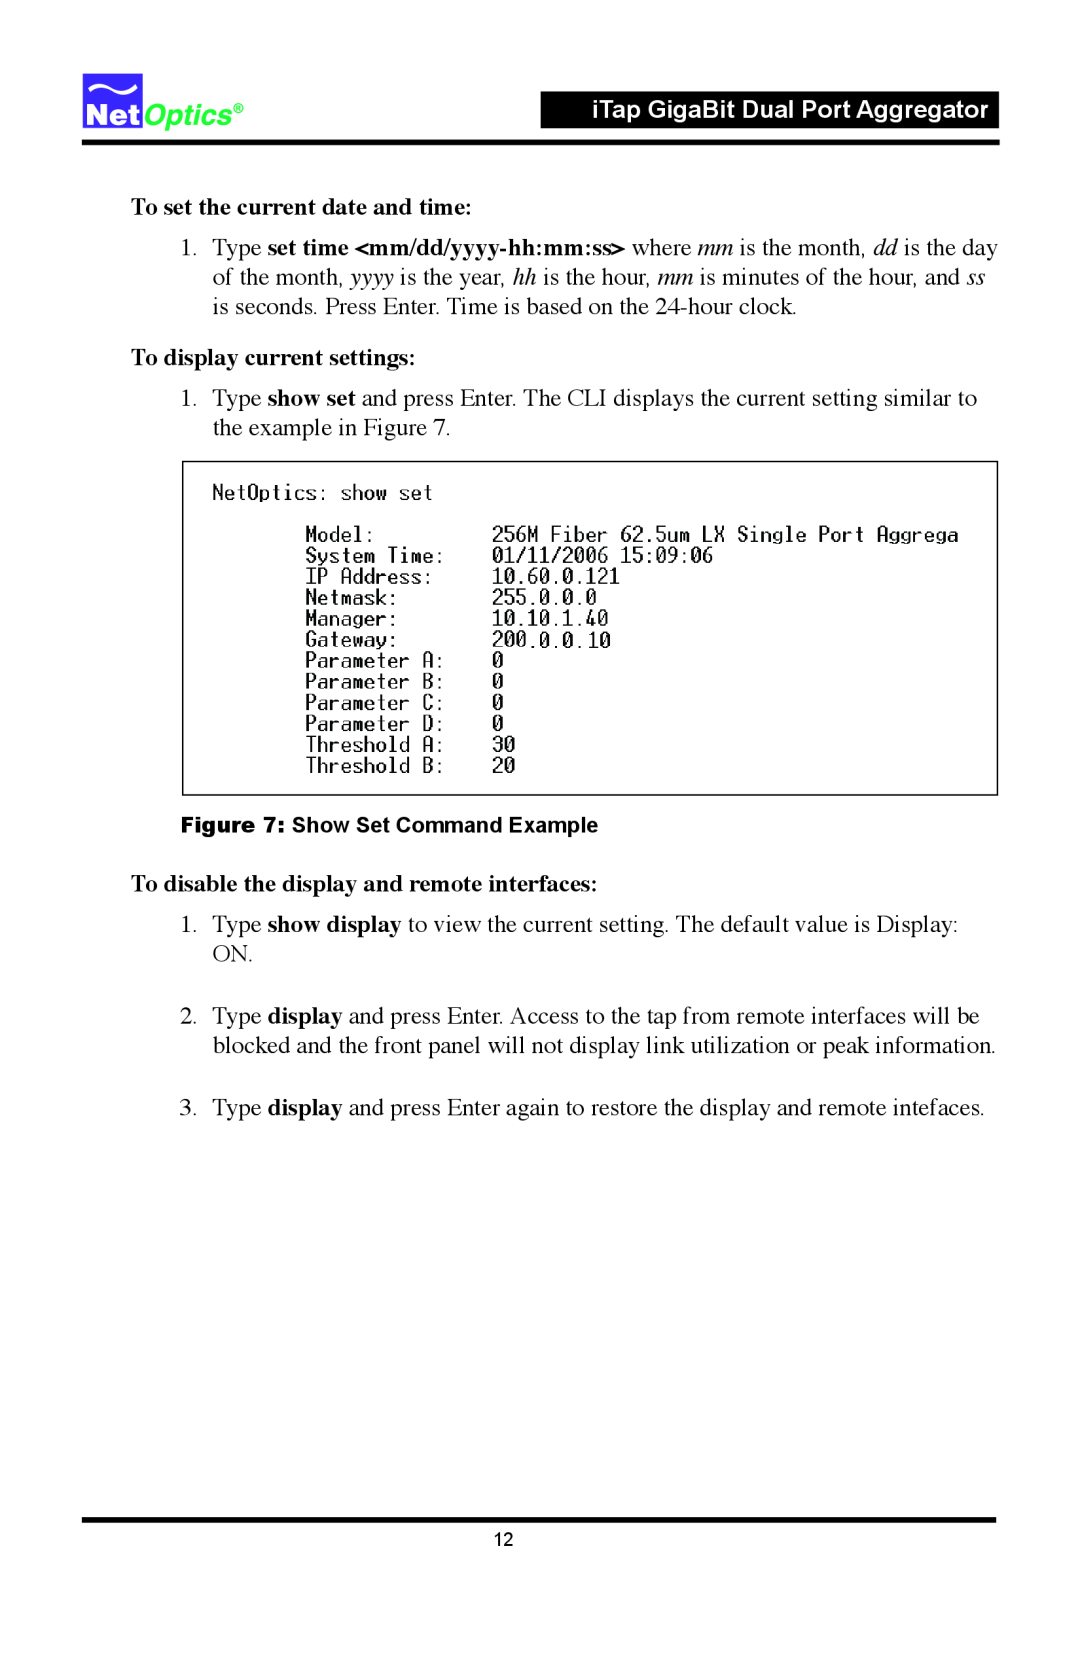 Net Optics 96542iTP manual To set the current date and time, To display current settings, iTap GigaBit Dual Port Aggregator 